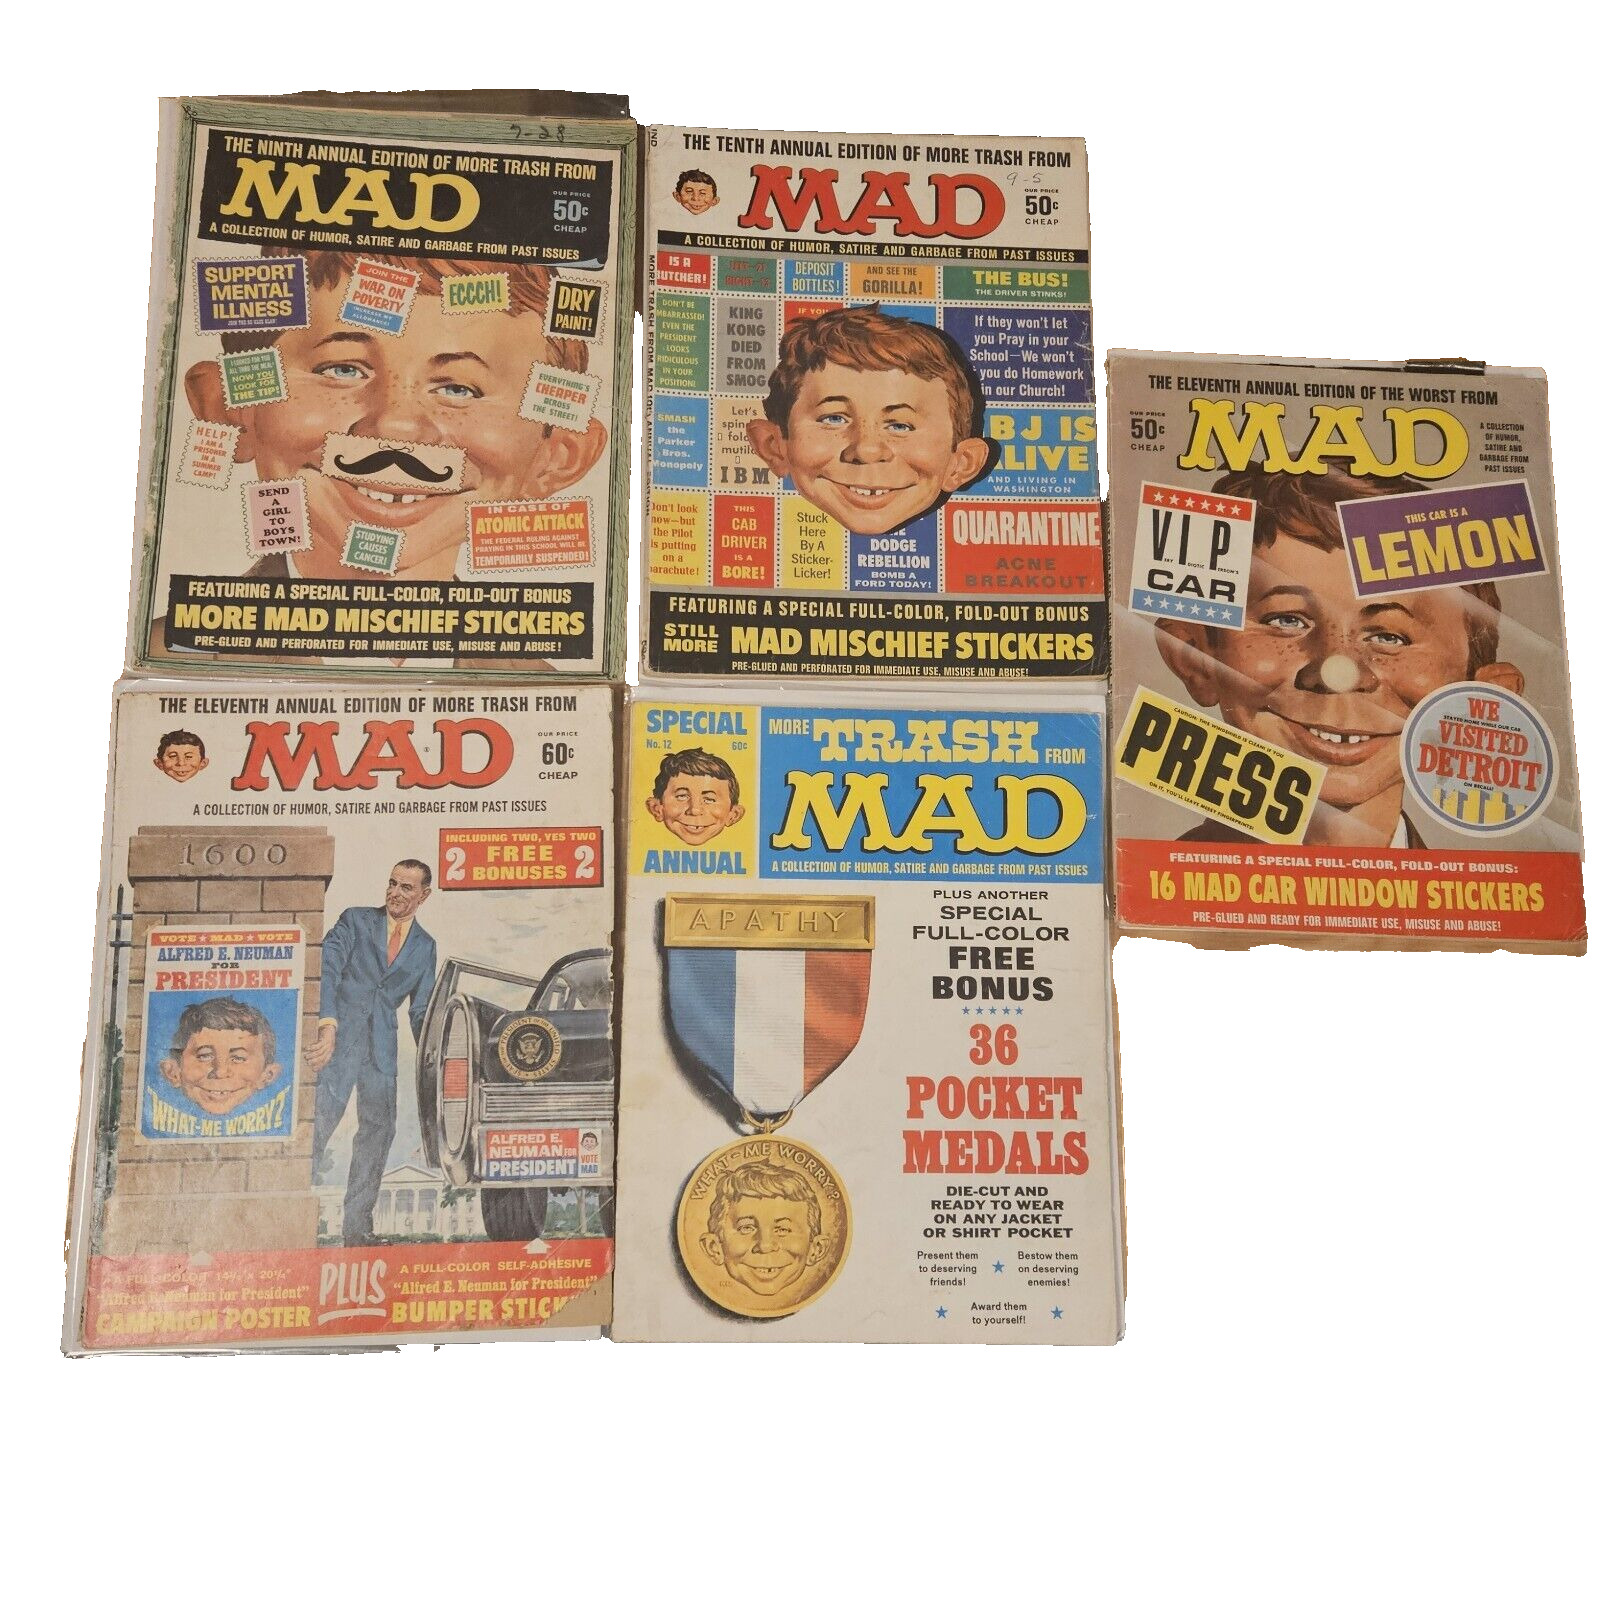 1970s MAD Magazines ANNUALS MORE TRASH 9, 10, 11, 12 and WORST OF #11   LOT OF 5